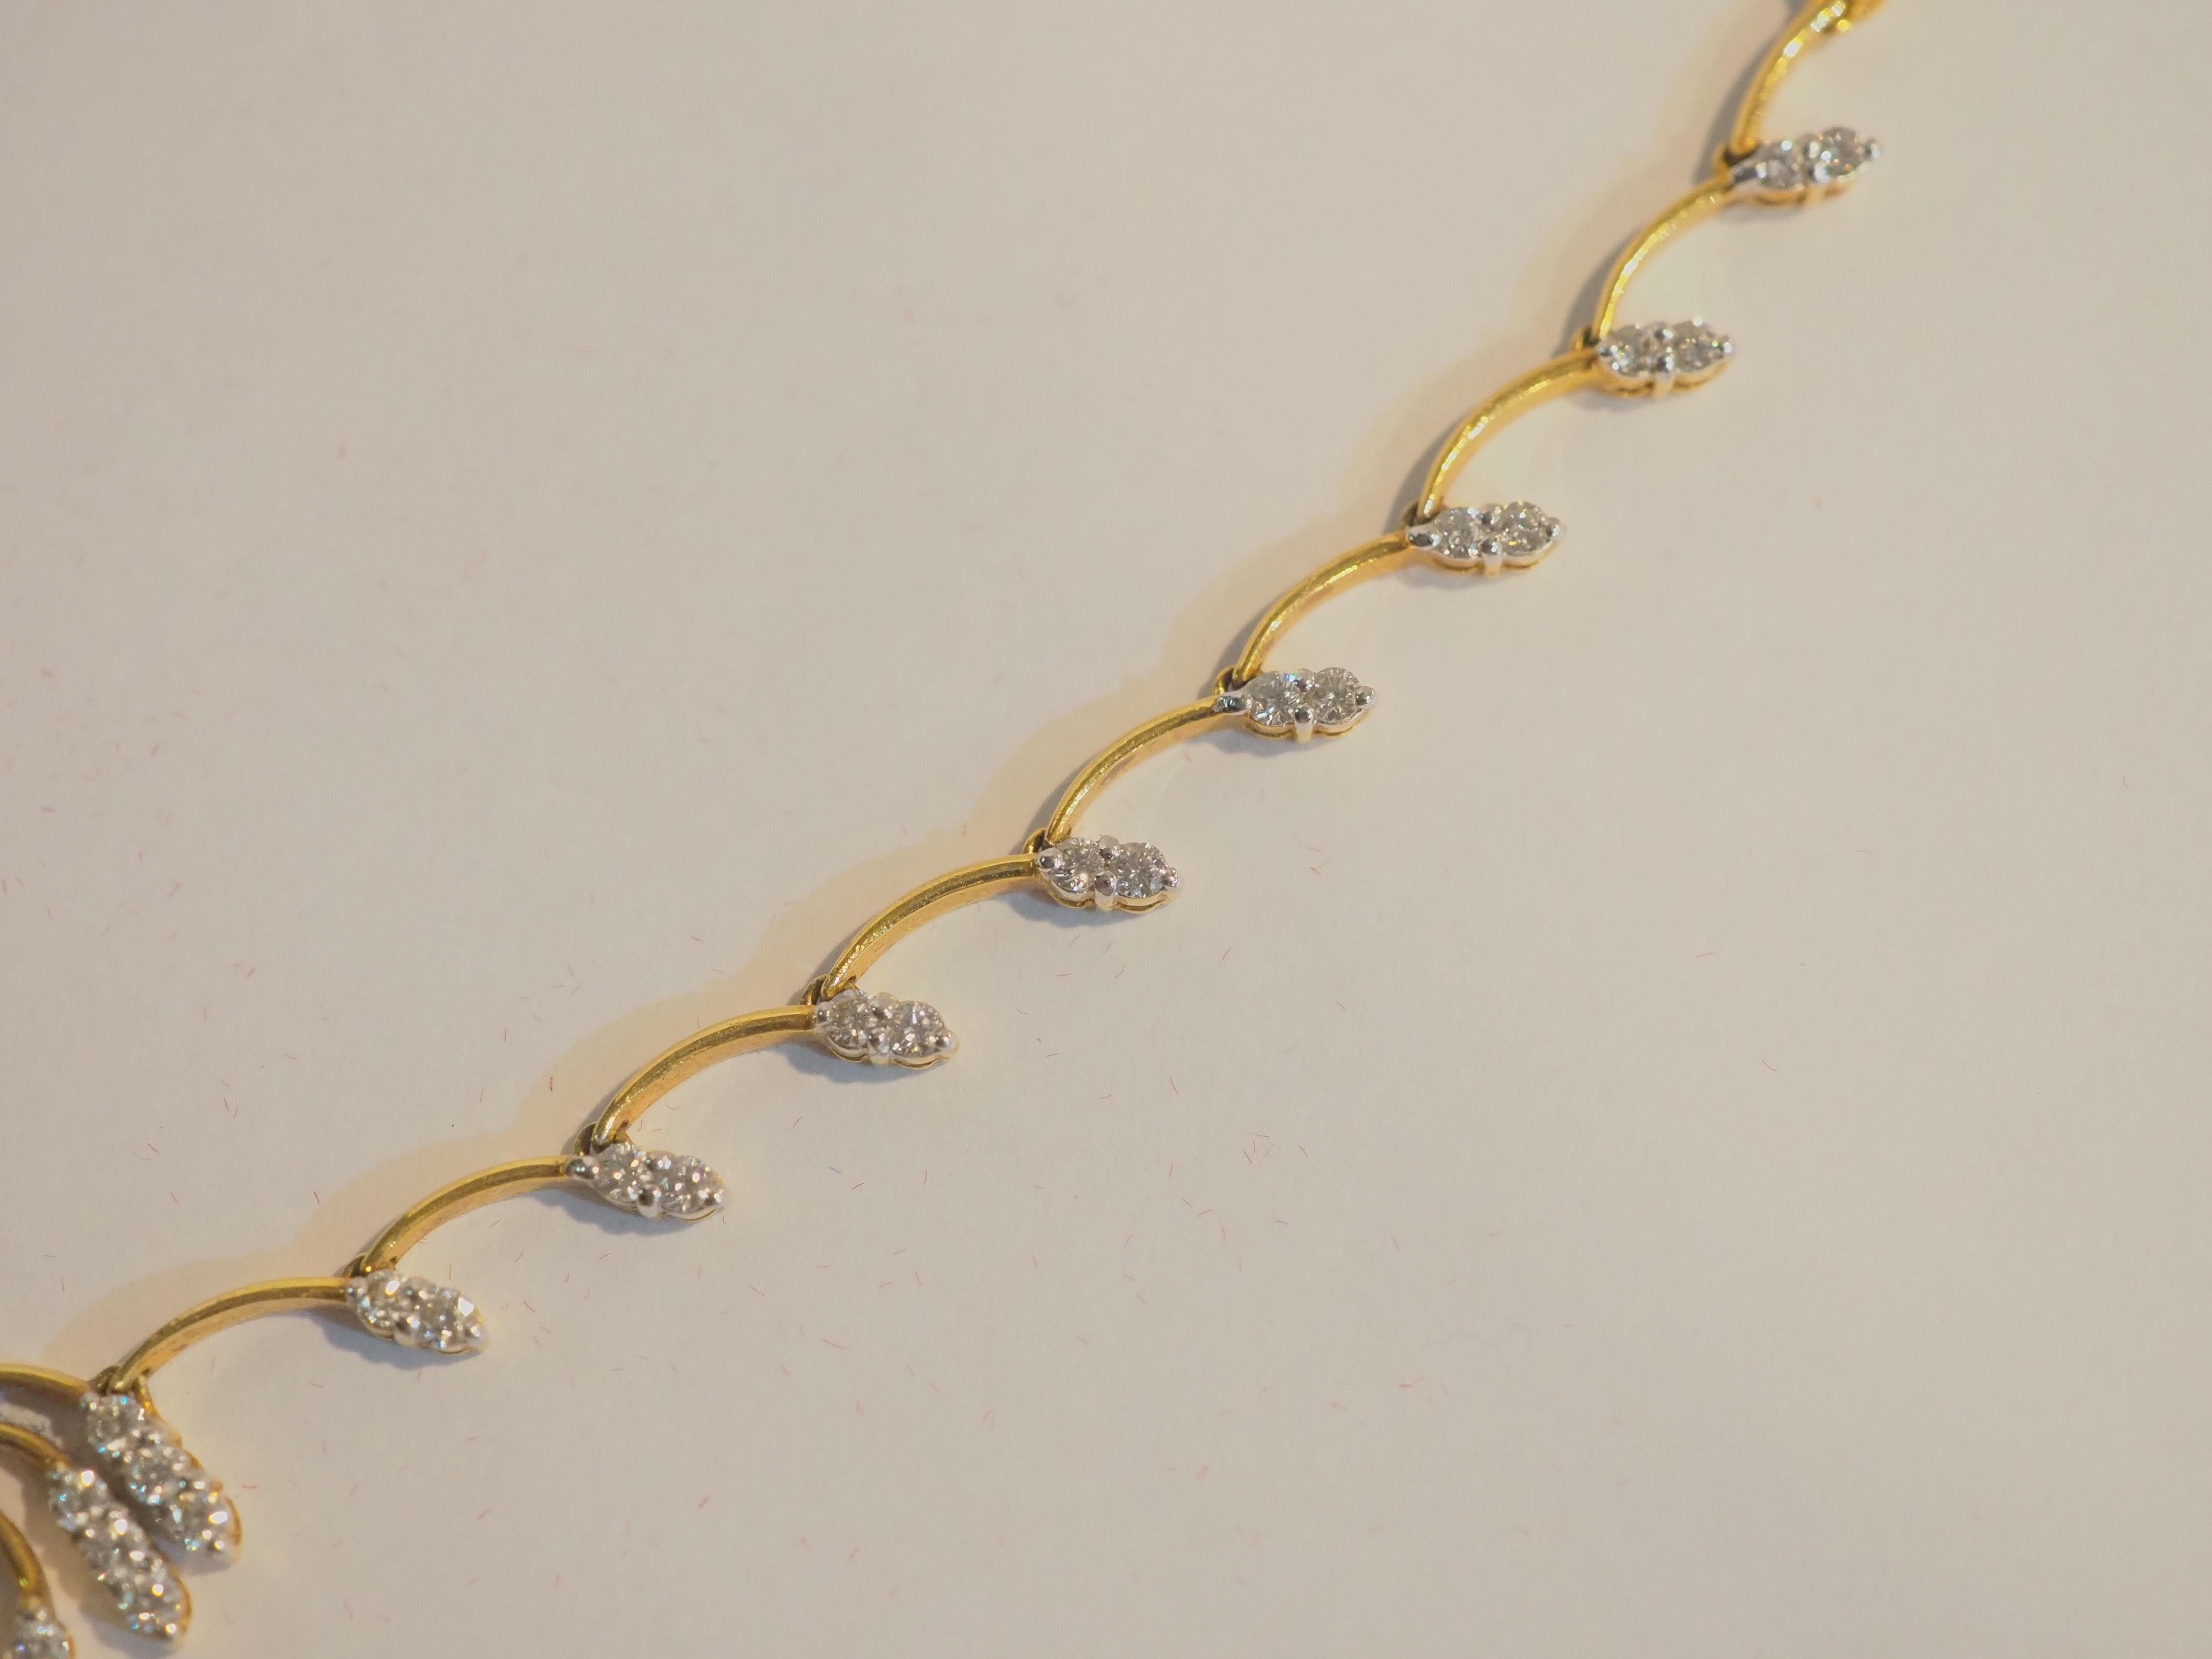 18K Gold 2 Carat Round Brilliant Diamond Floral Chain Necklace In Excellent Condition For Sale In เกาะสมุย, TH